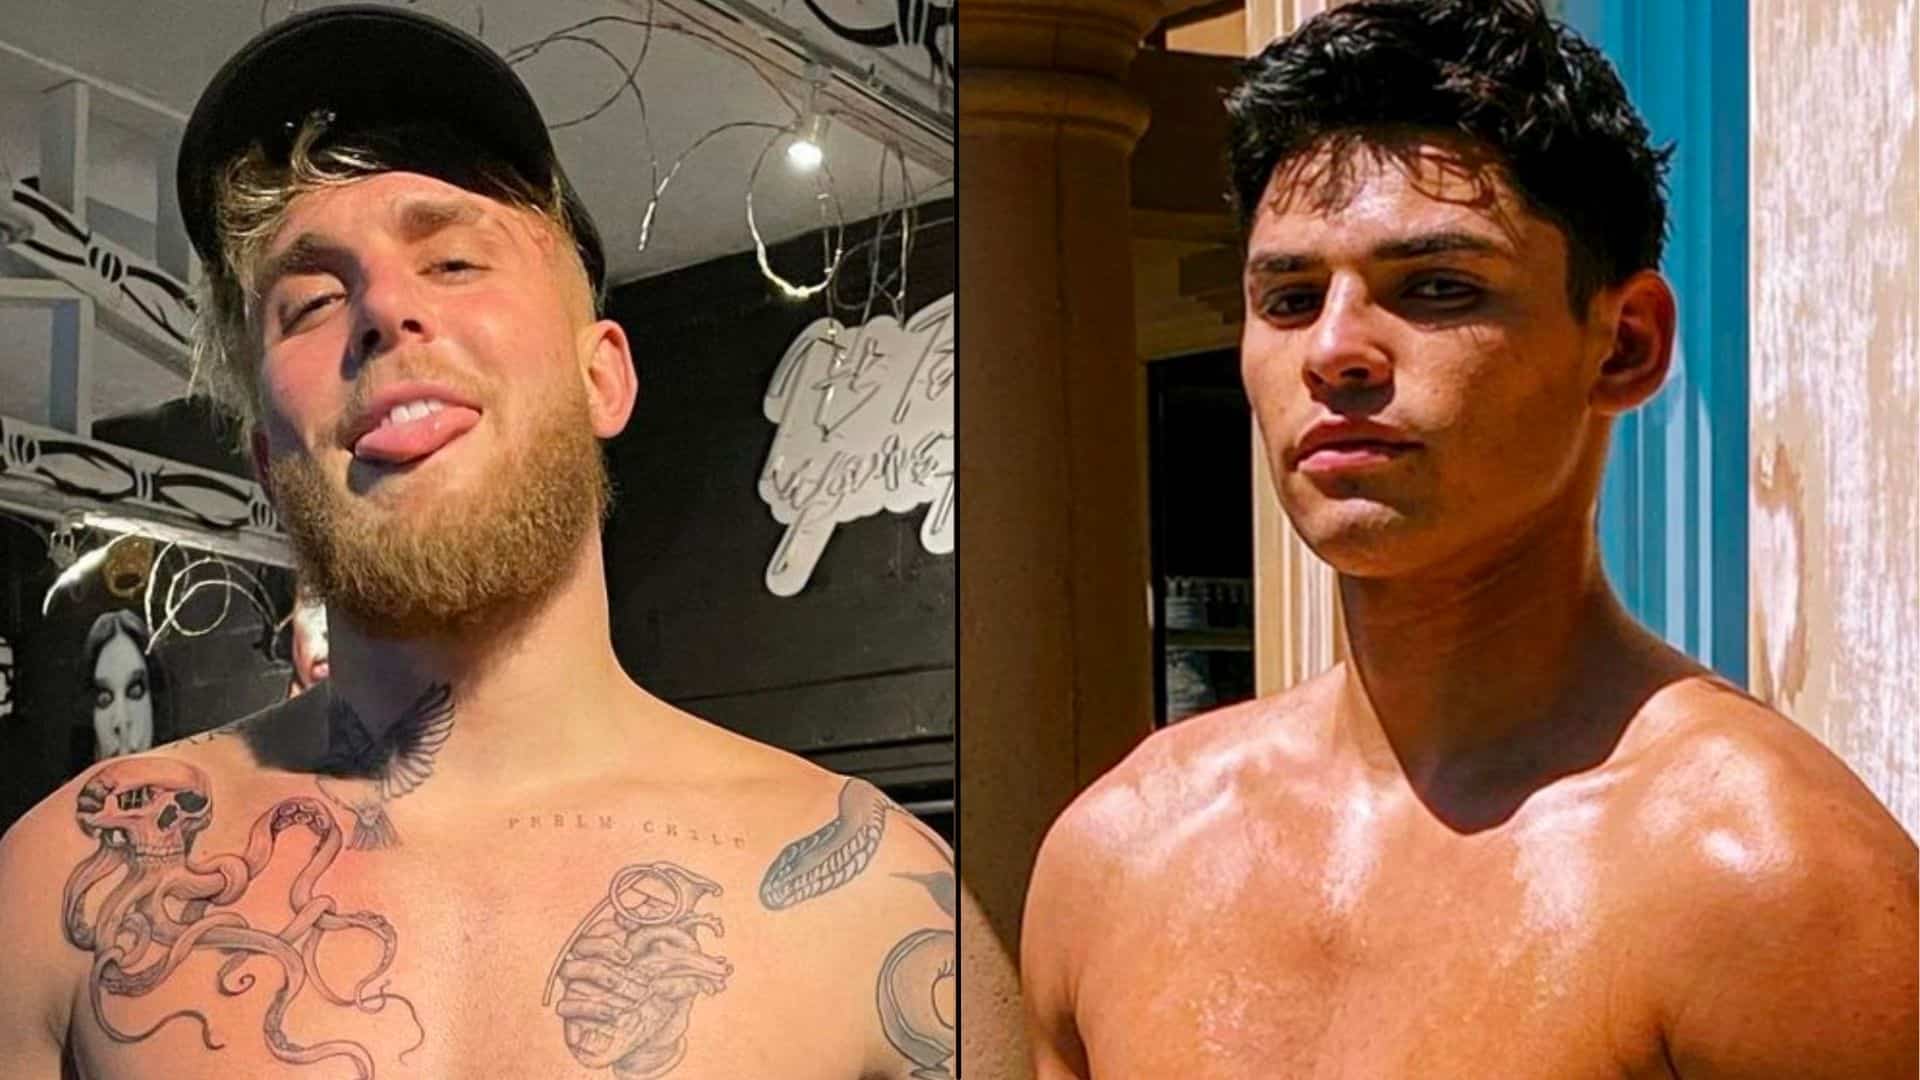 Jake Paul side-by-side with Ryan Garcia in boxing training